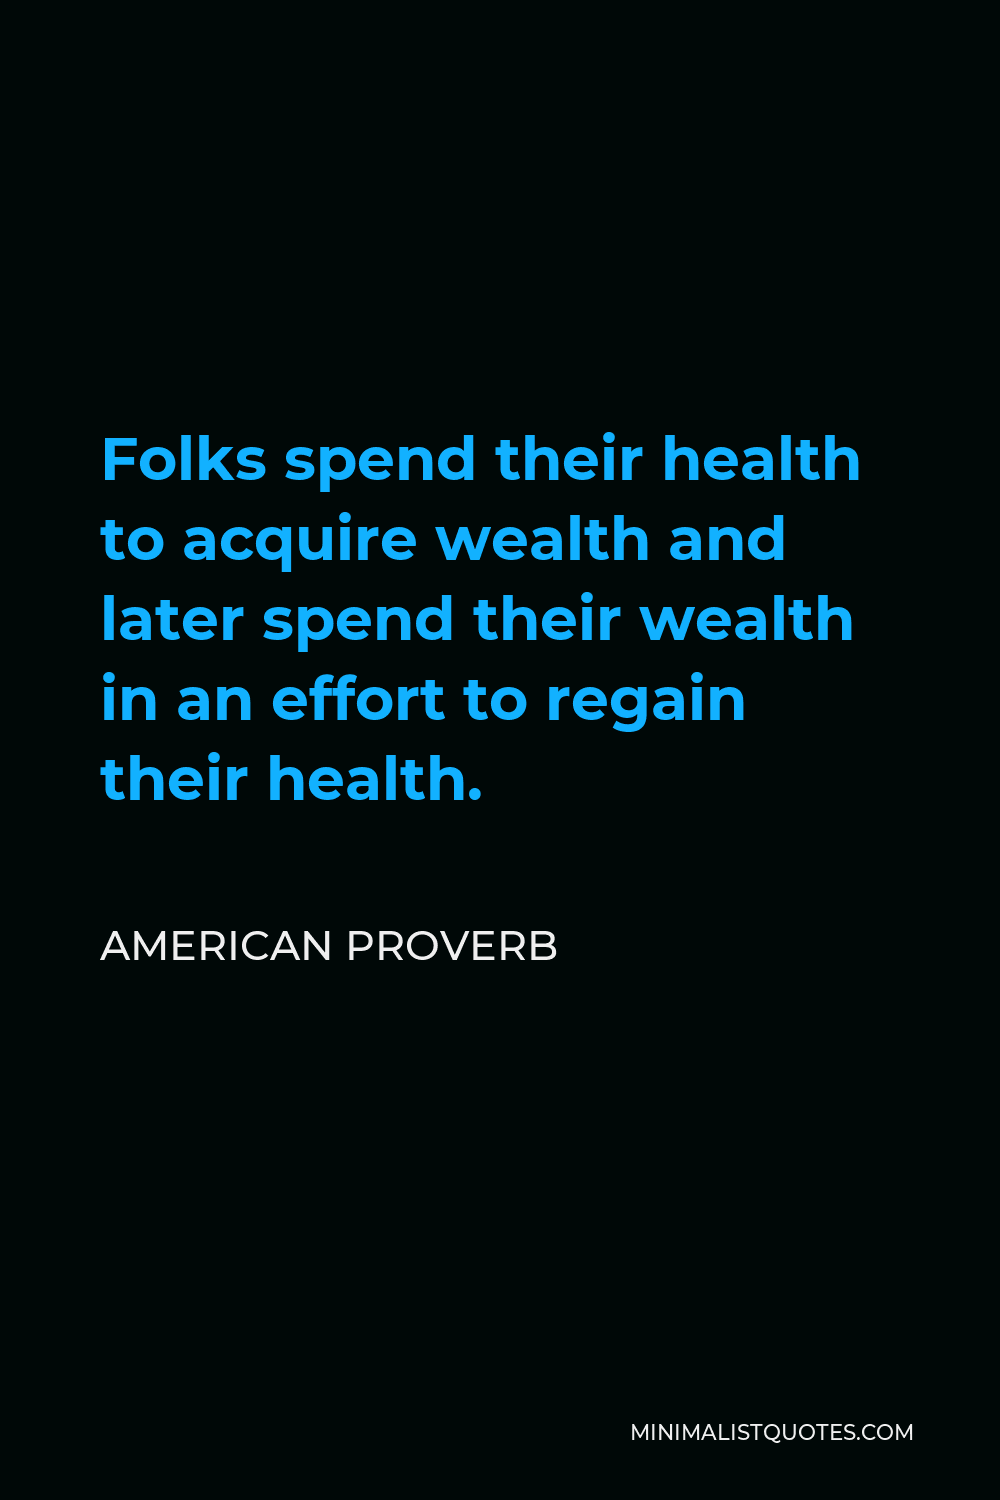 American Proverb Quote - Folks spend their health to acquire wealth and later spend their wealth in an effort to regain their health.